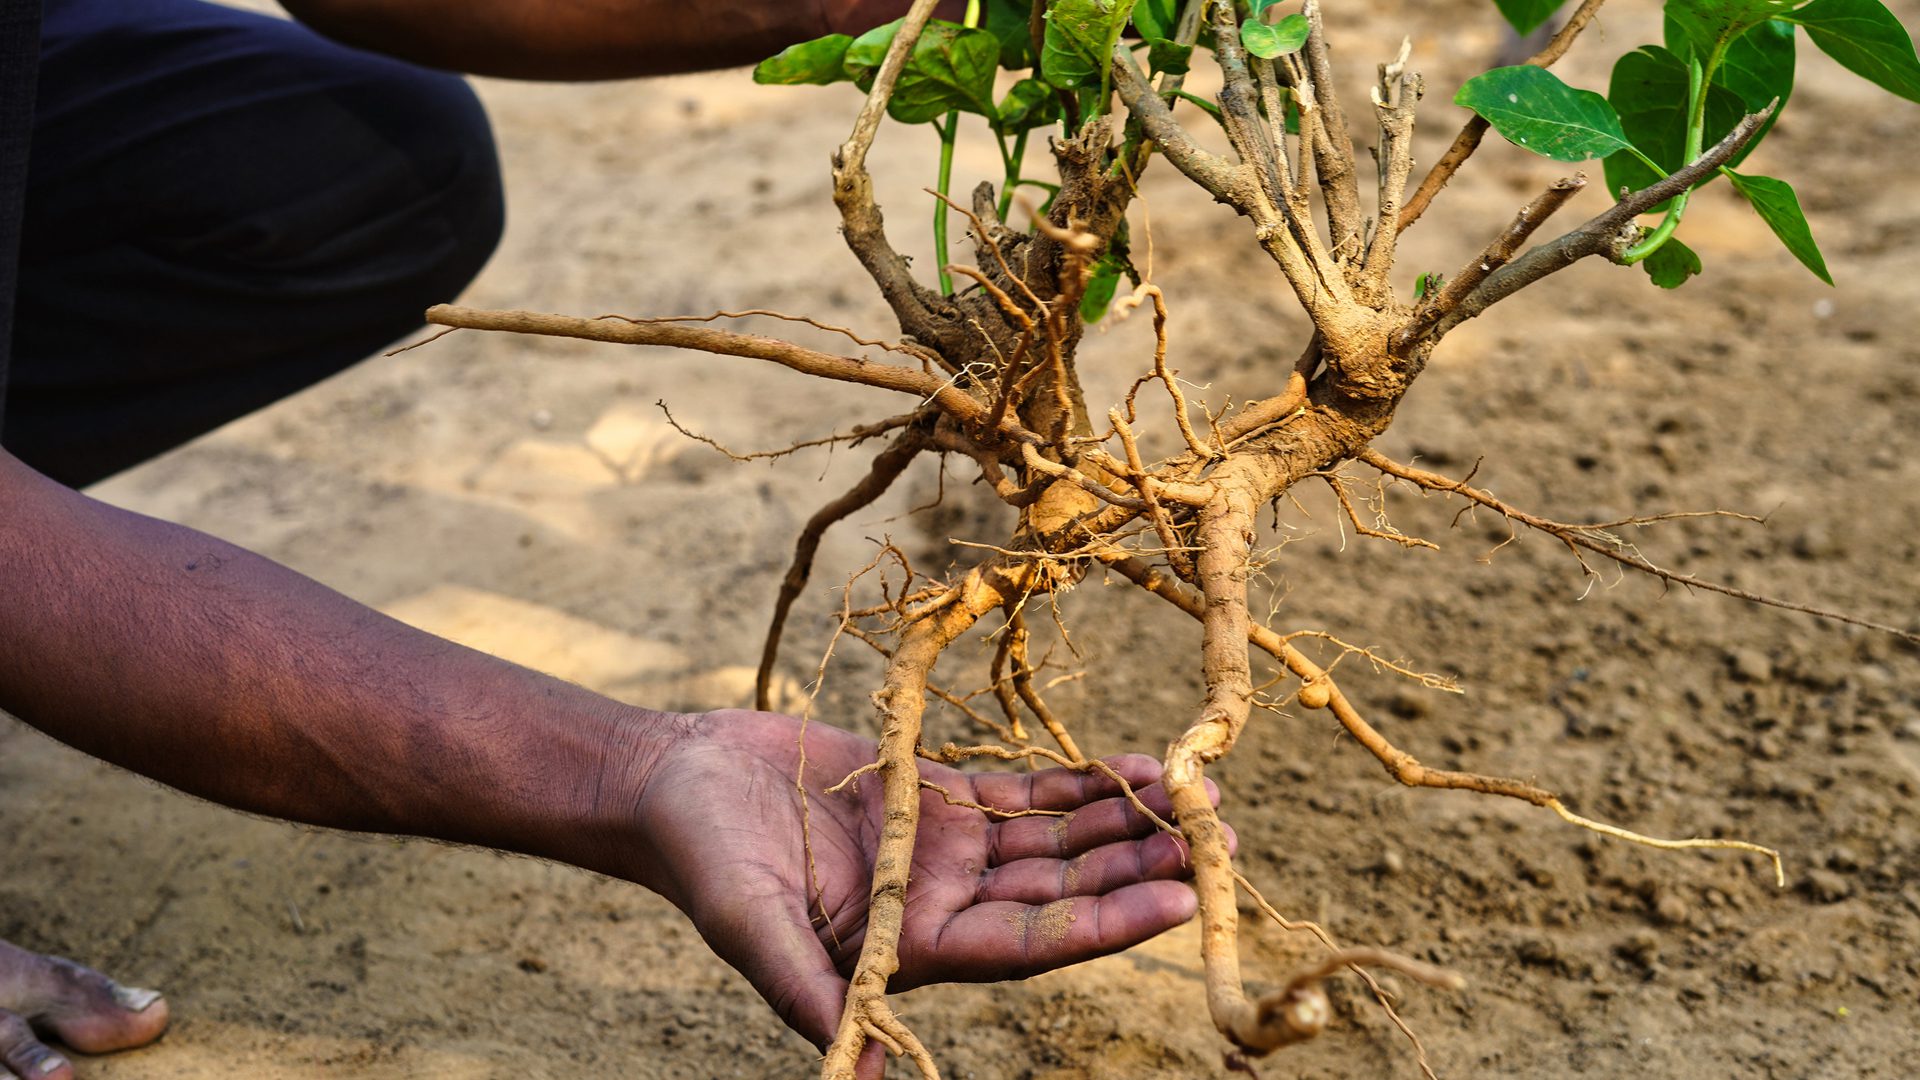 A person gently holding and displaying the exposed roots of a young plant they are about to plant into the ground. The soil in the background is light brown, suggesting dry conditions. The plant has thin, tangled roots and several green leaves.